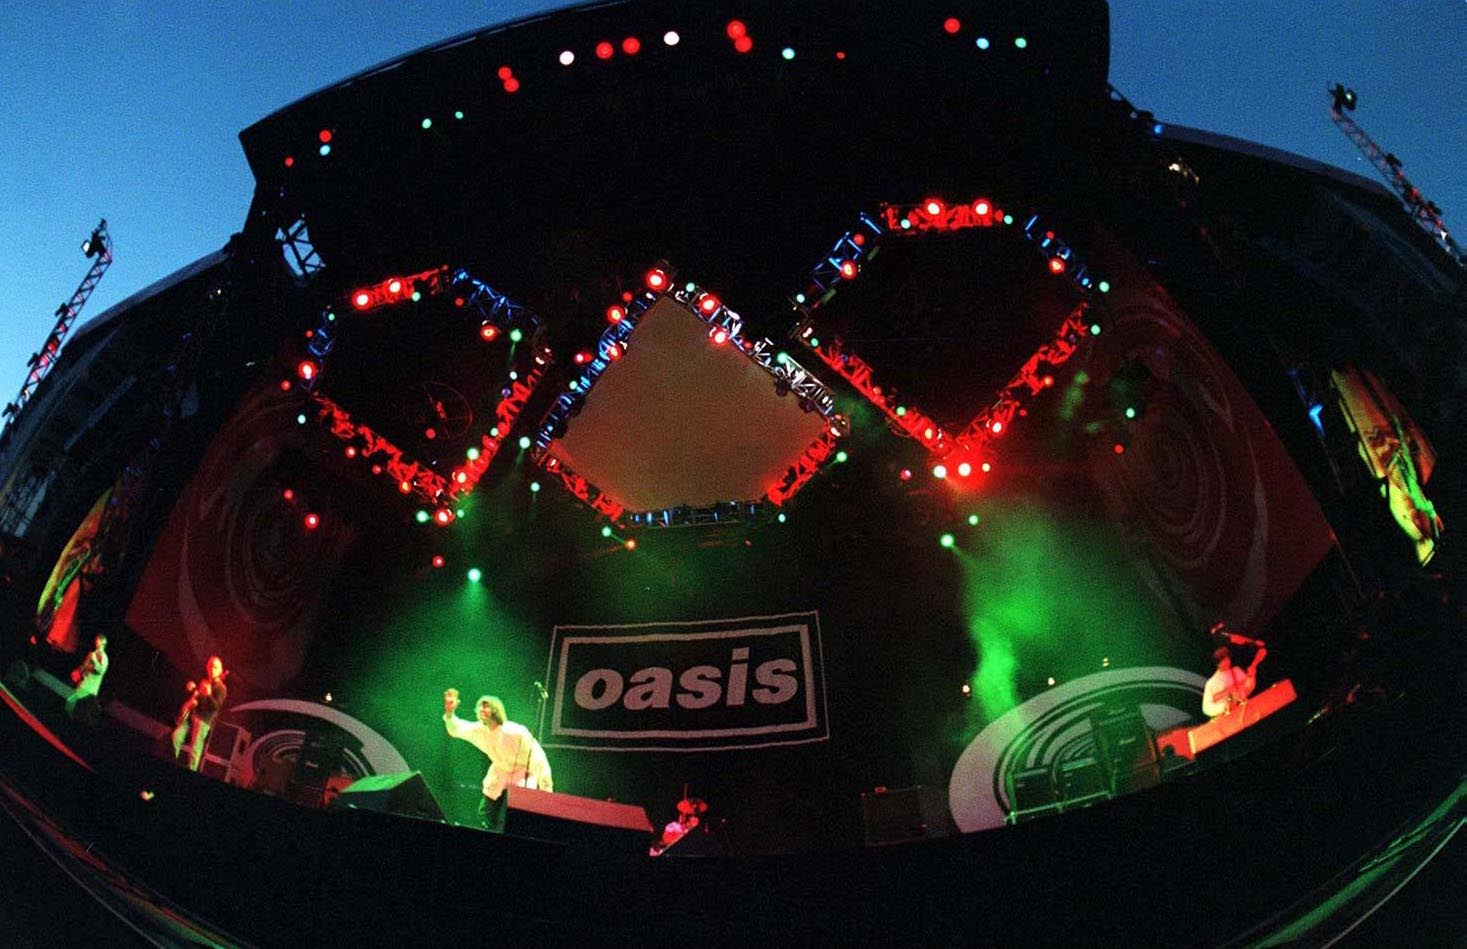 https://www.nme.com/news/music/watch-the-new-trailer-for-the-oasis-knebworth-1996-documentary-3015256?utm_source=rss&utm_medium=rss&utm_campaign=watch-the-new-trailer-for-the-oasis-knebworth-1996-documentary